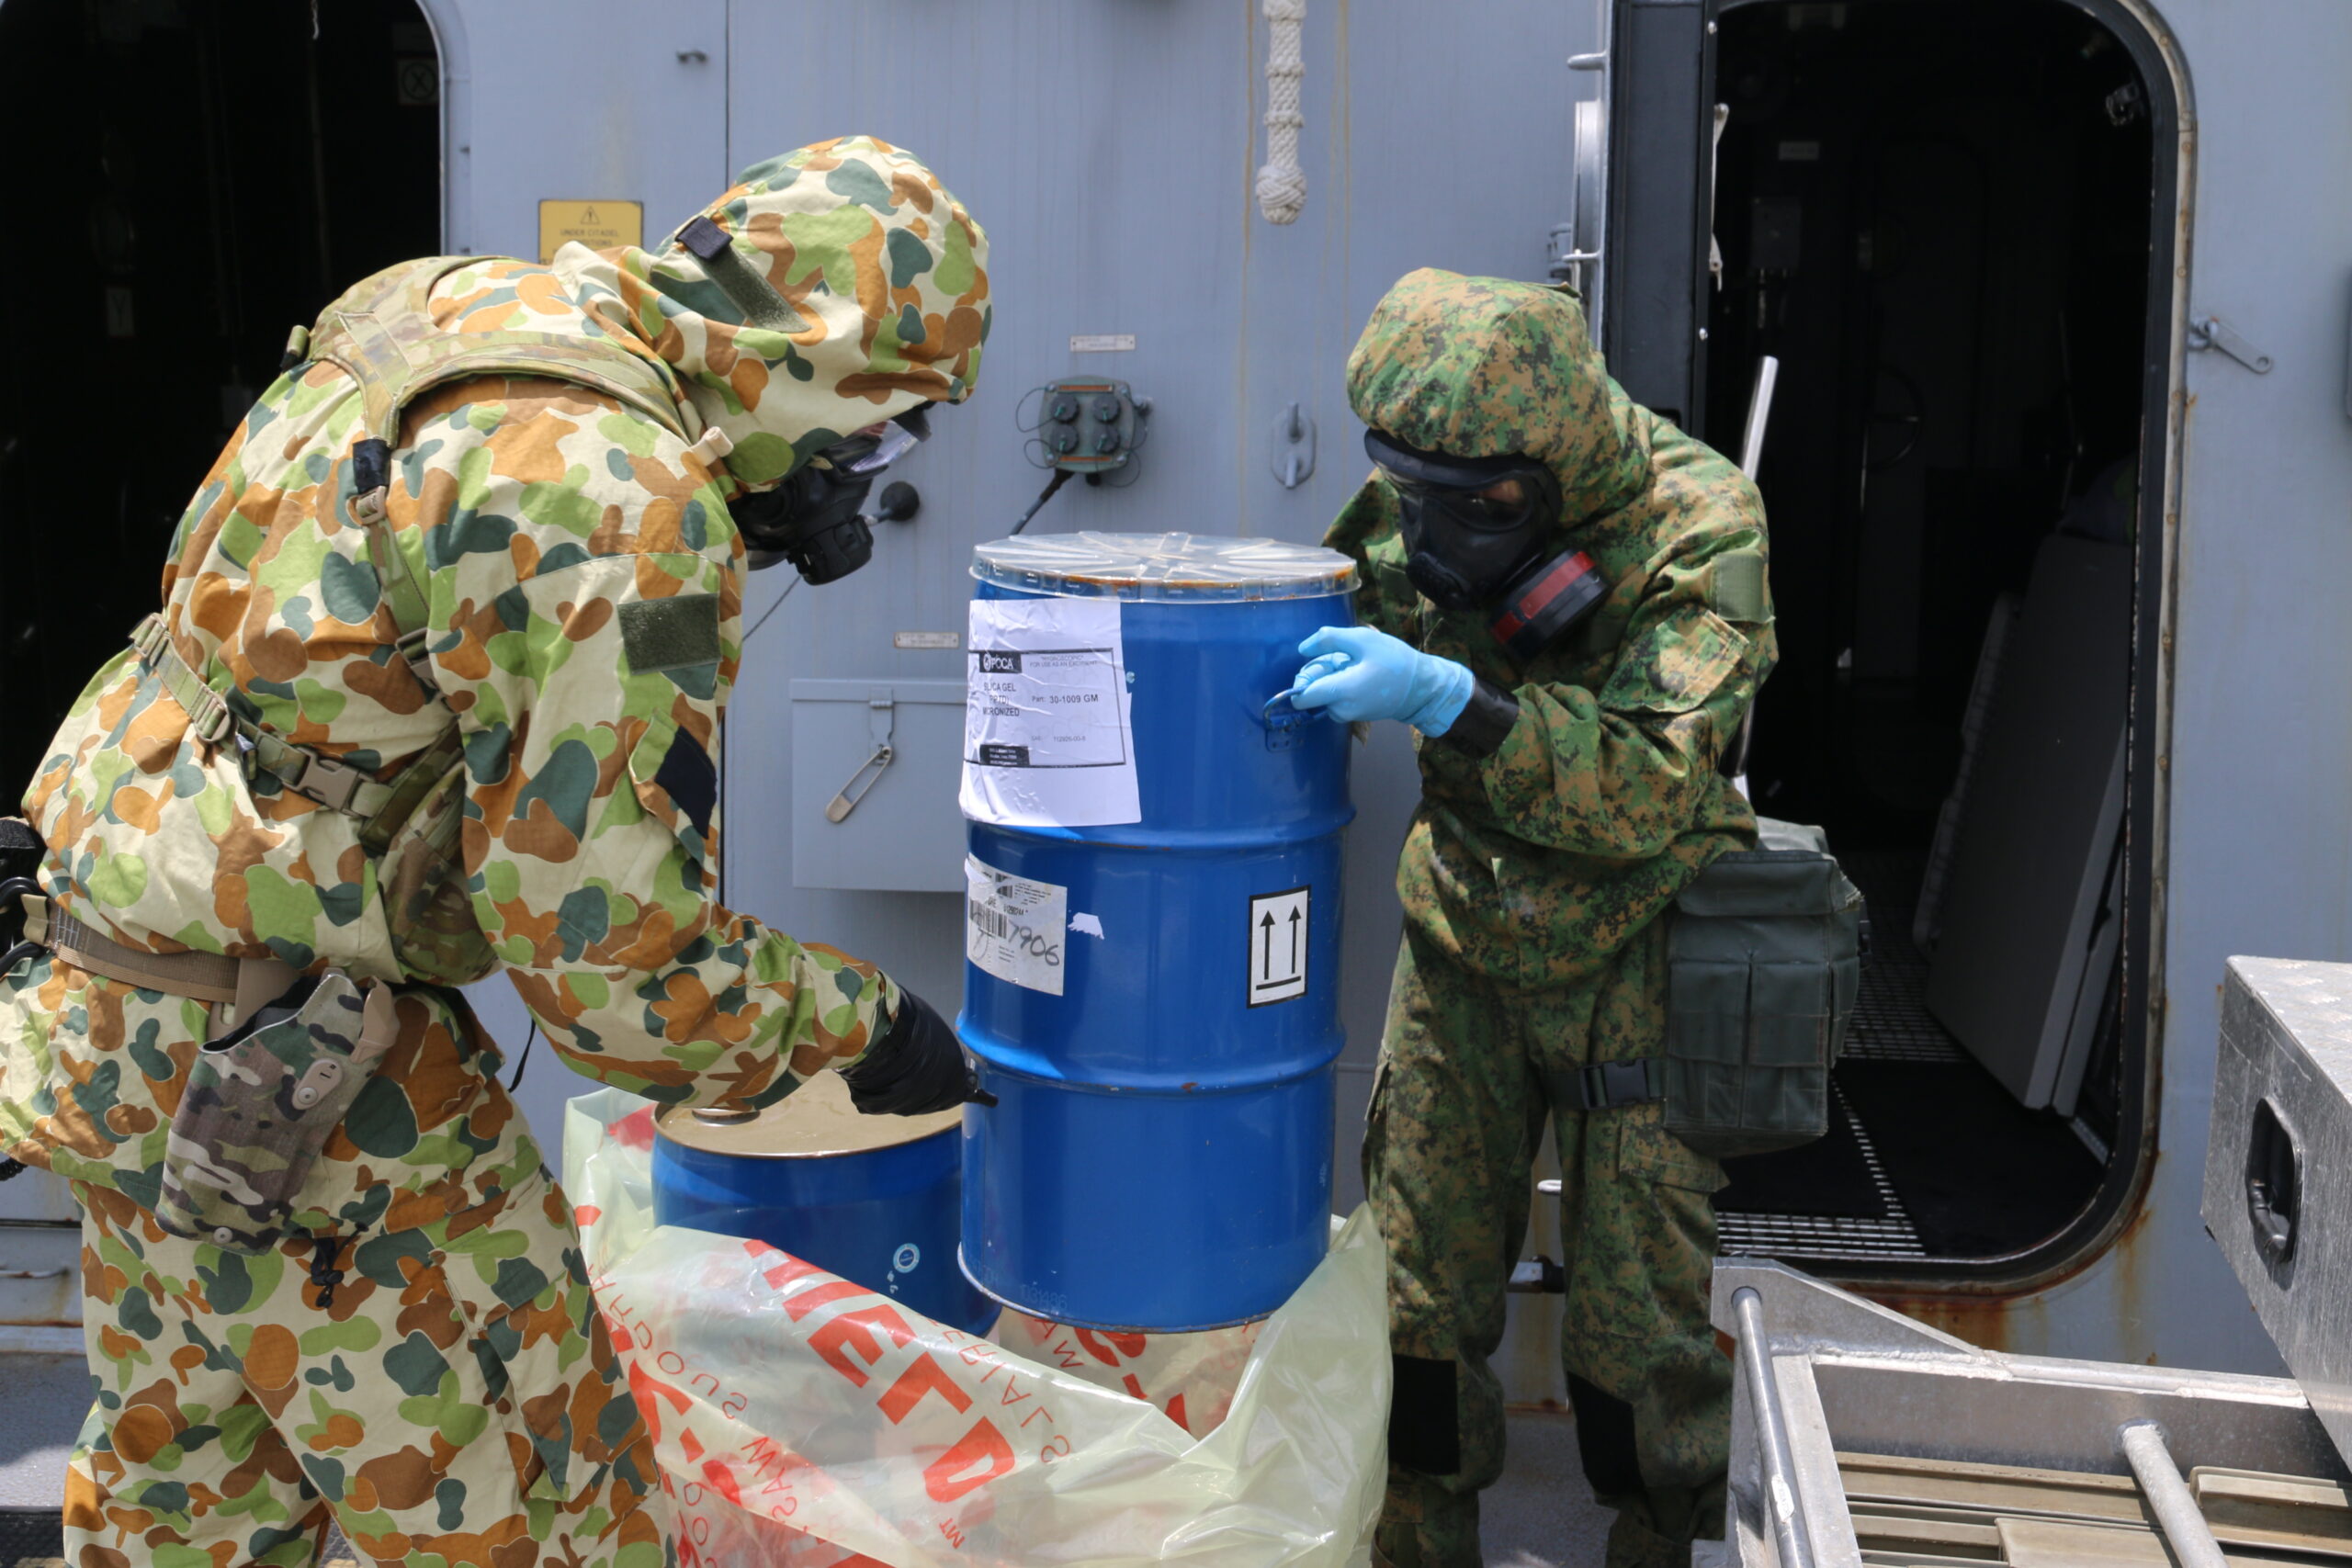 Australian and Singaporean defence personnel conduct CBRN training on board HMAS Brisbane whilst alongside in Sembawang *** Local Caption *** Australian Army special operations force soldiers from the Special Operations Engineer Regiment (SOER) joined 36th and 39th Battalion, Singapore Combat Engineers, specialists for counter-CBRNE (chemical, biological, radiological, nuclear and high-yield explosives) training in Singapore as part of Indo-Pacific Endeavour 2023. The Australian Army and Singapore Army combat engineers conducted training together in Singapore and on the Royal Australian Navy destroyer HMAS Brisbane to share skills and further enhance interoperability. SOER counter-CBRNE specialist soldiers are highly trained and responsible for developing Australian Defence Force doctrine and ensuring the ADF is equipped to meet current and future needs. SOER is an Australian Army special operations force unit within Special Forces Group providing the Australian Government with unique technical capabilities in support of the national interest.